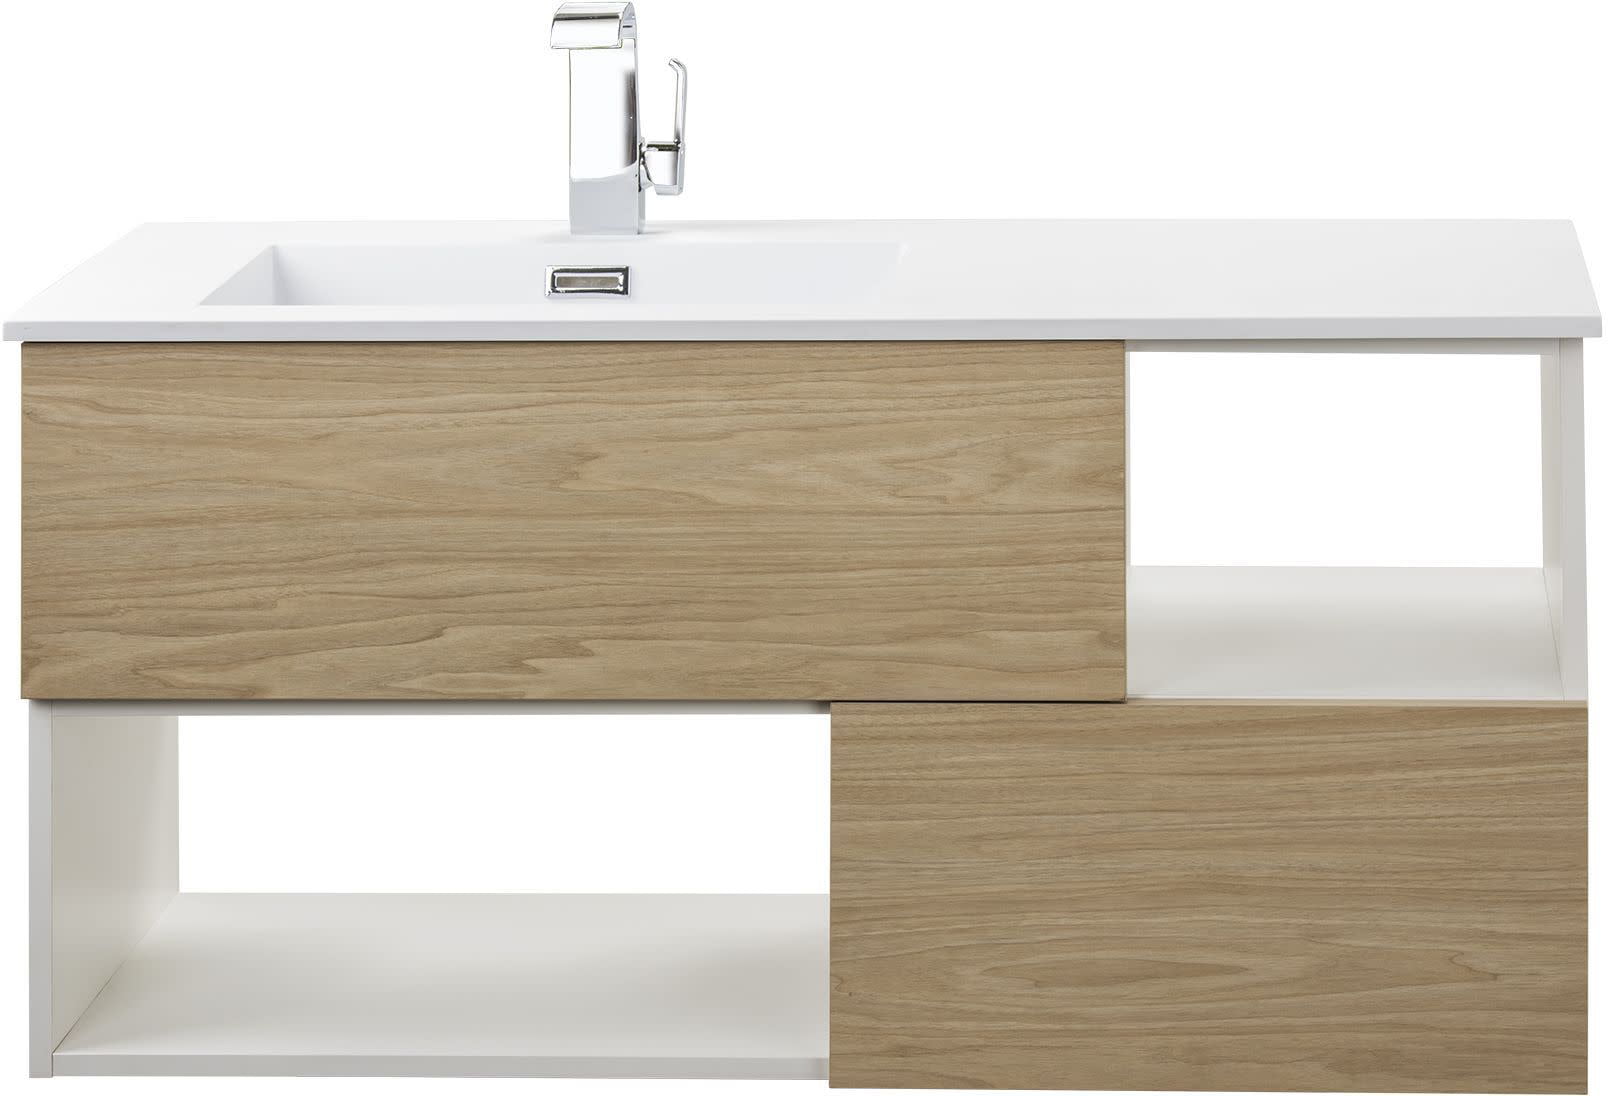 cutler kitchen and bath floating vanity